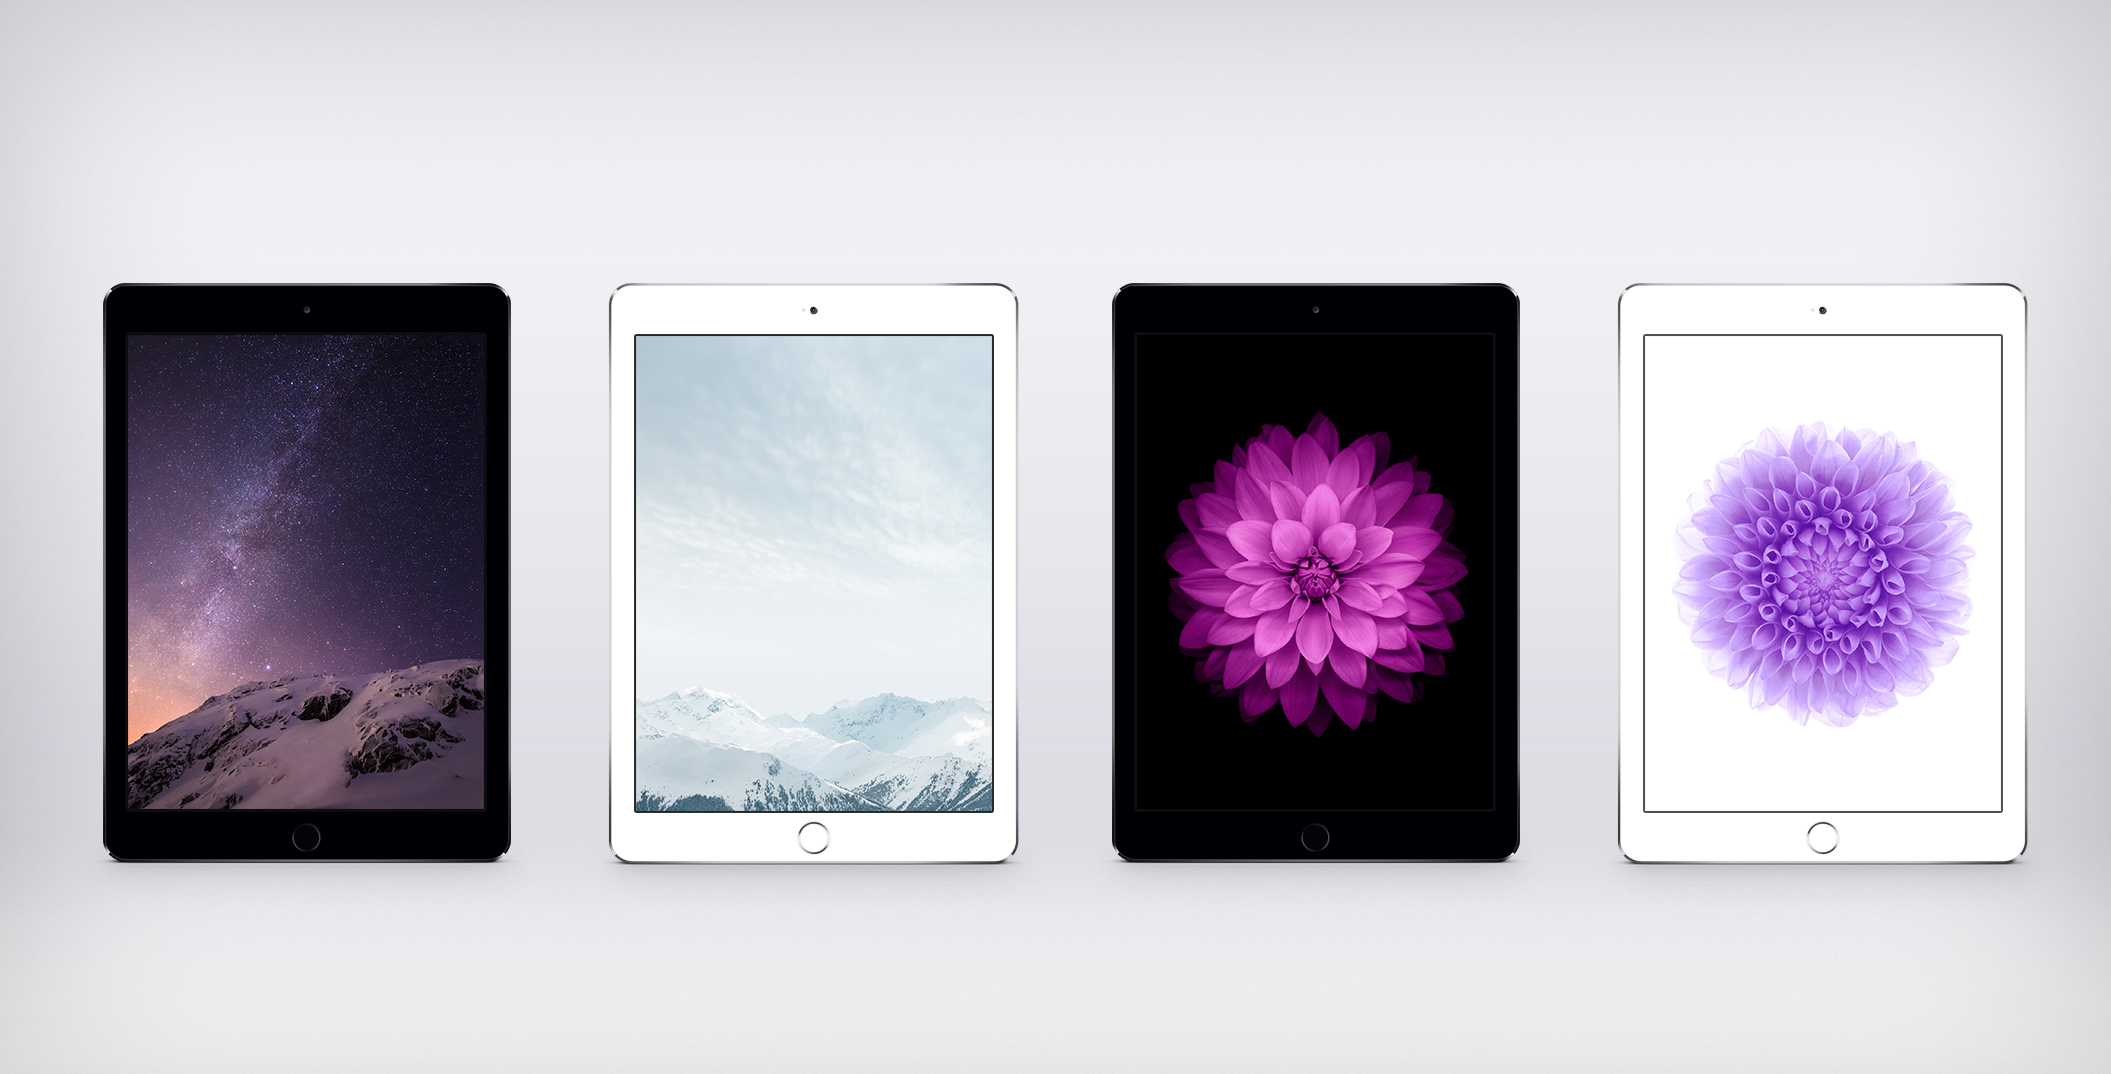 Ios gm wallpapers for ipad by jasonzigrino on